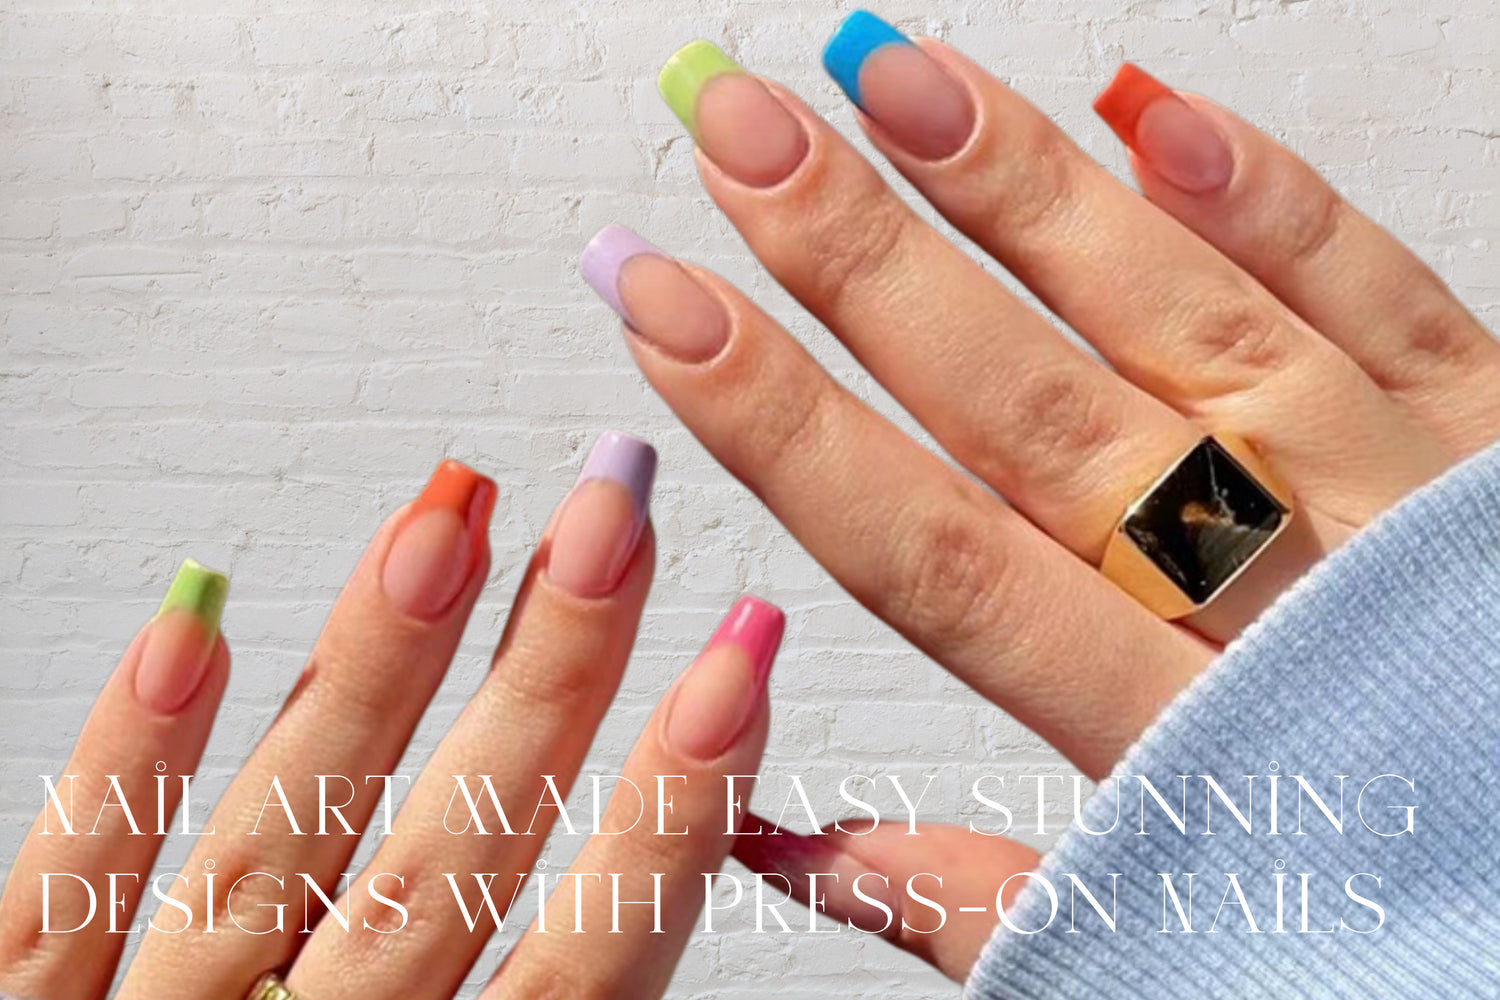 Nail Art Made Easy: Stunning Designs with Press-On Nails